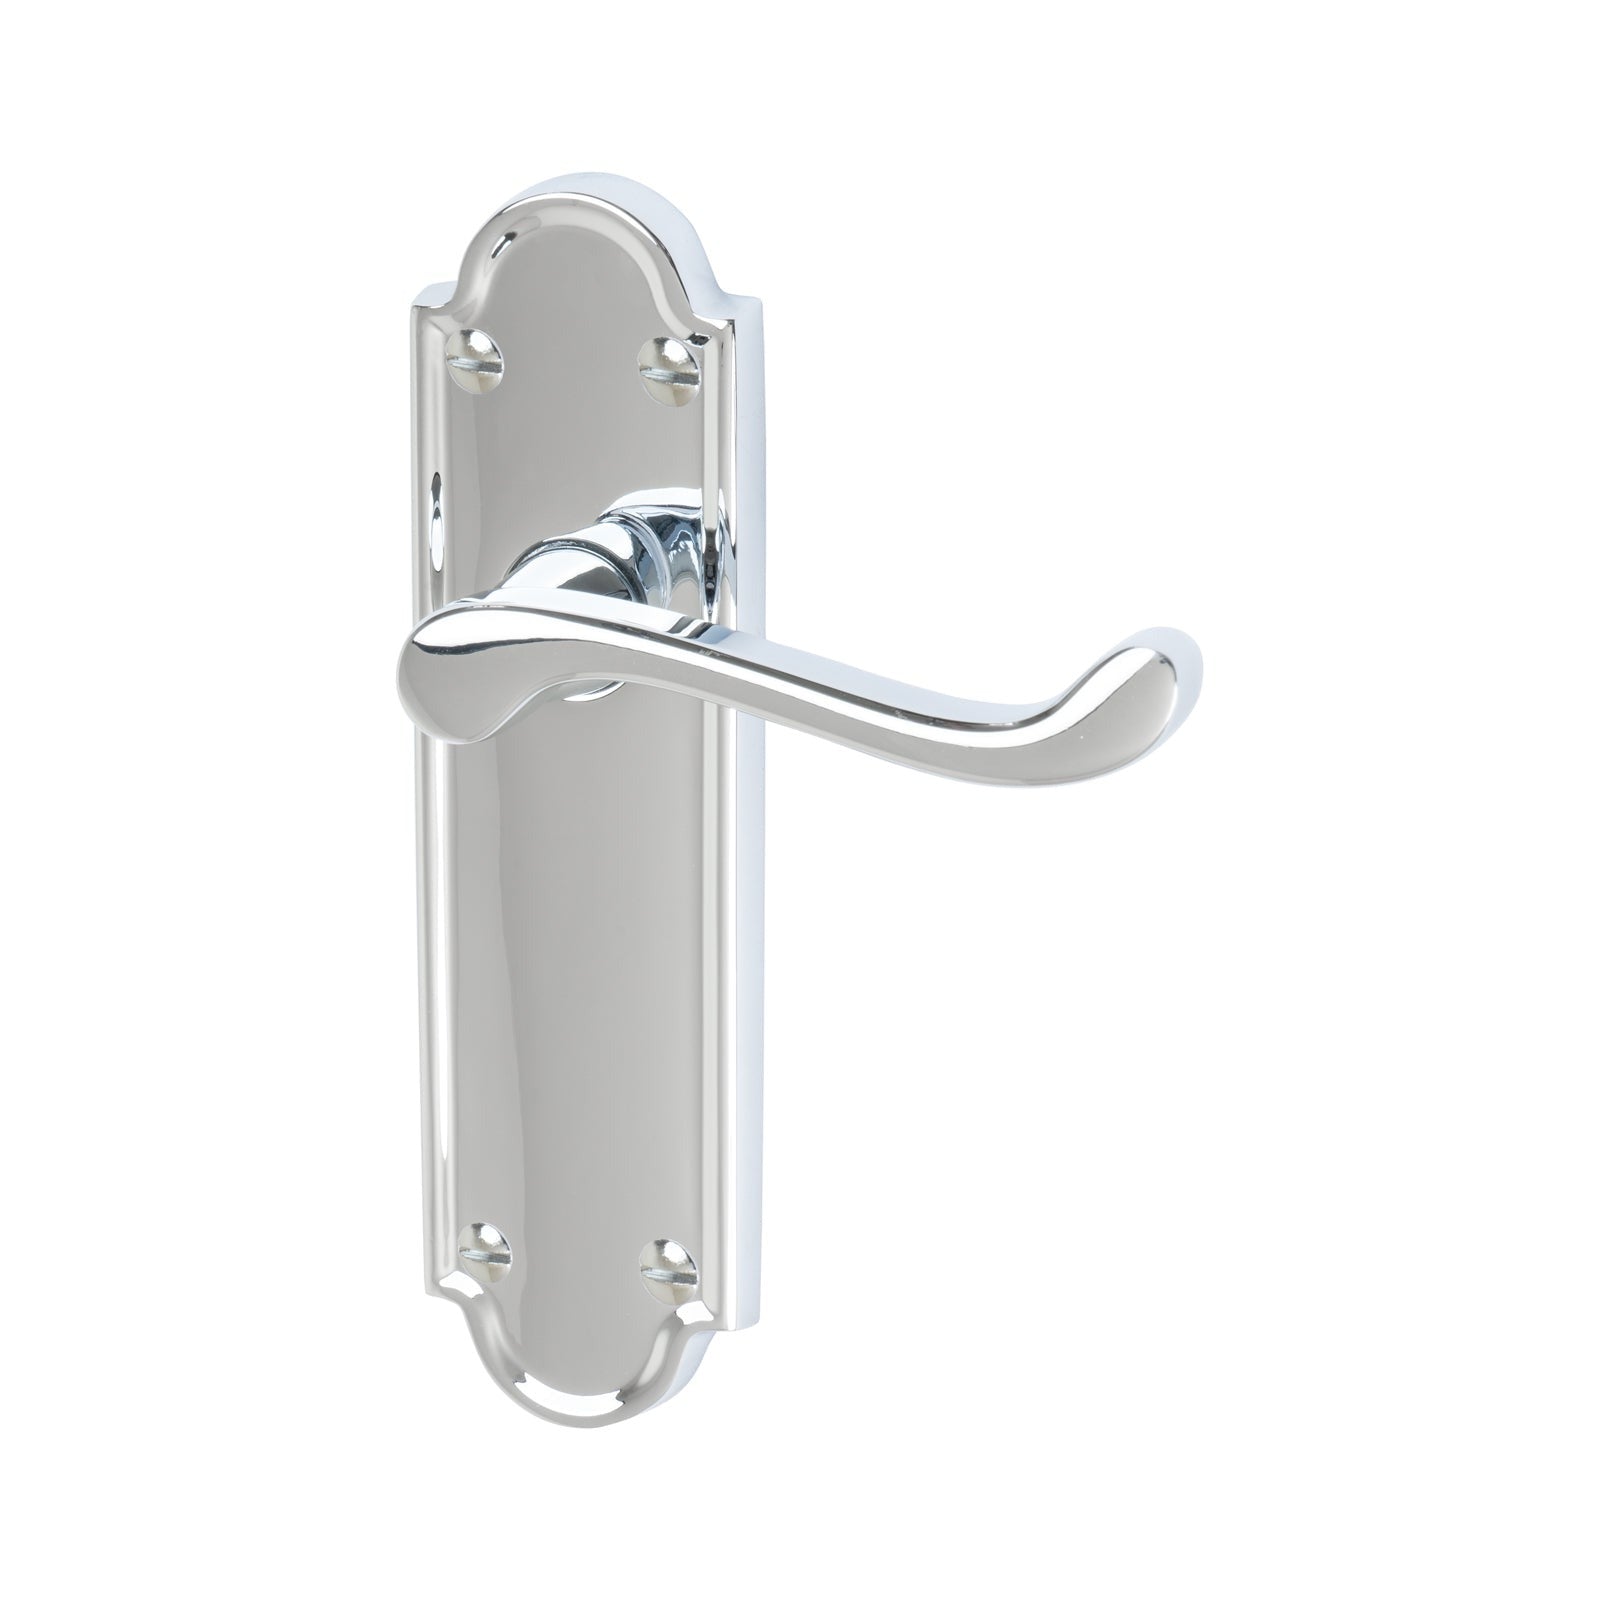 Meridian Door Handles On Plate Latch Handle in Polished Chrome SHOW